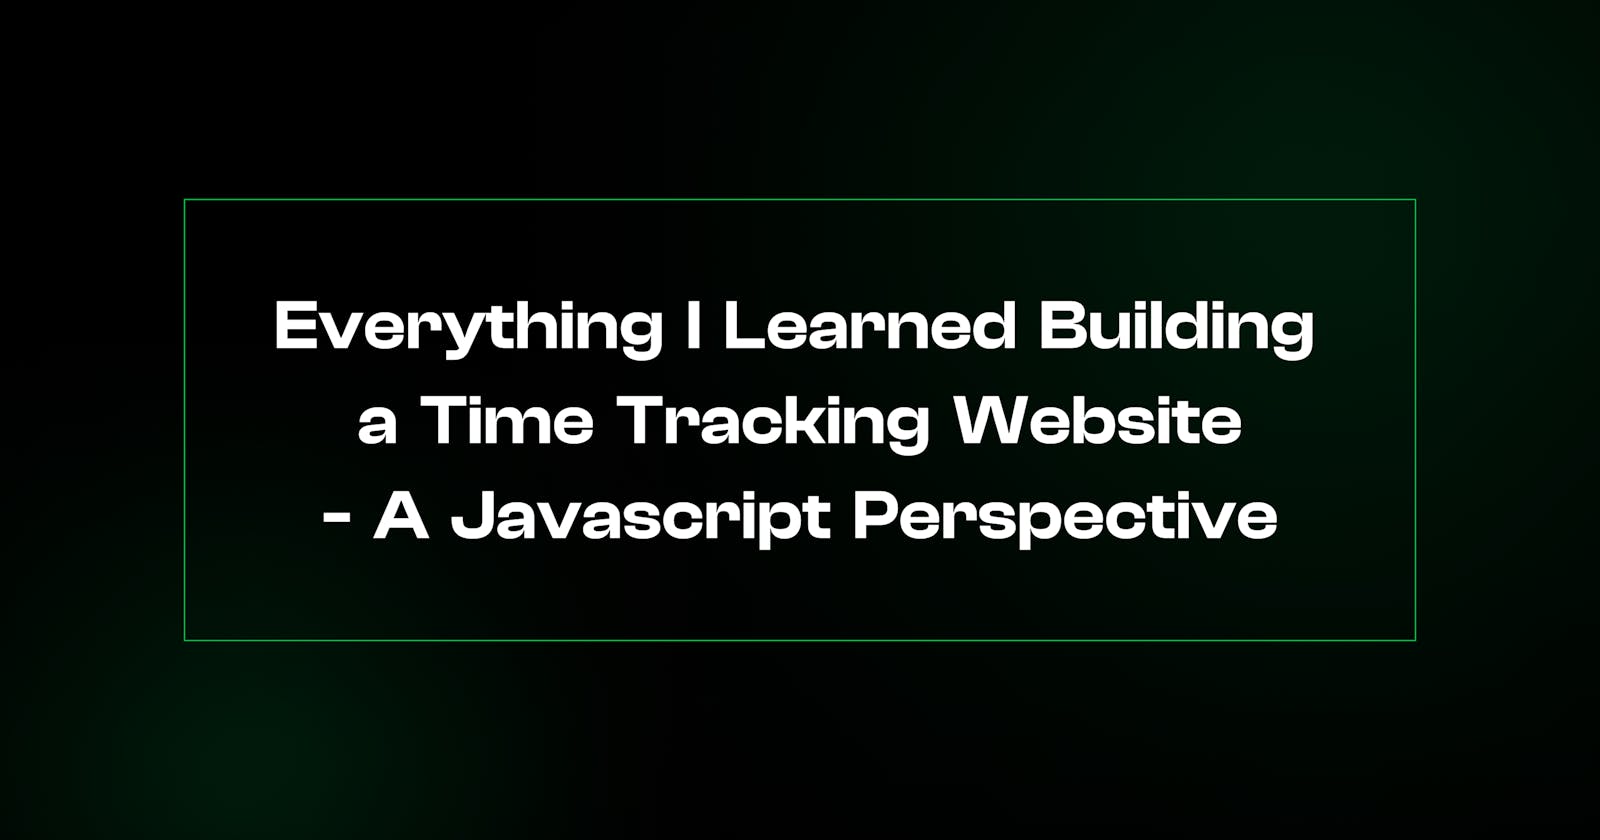 Everything I Learned Building a Time Tracking Website - A Javascript Perspective